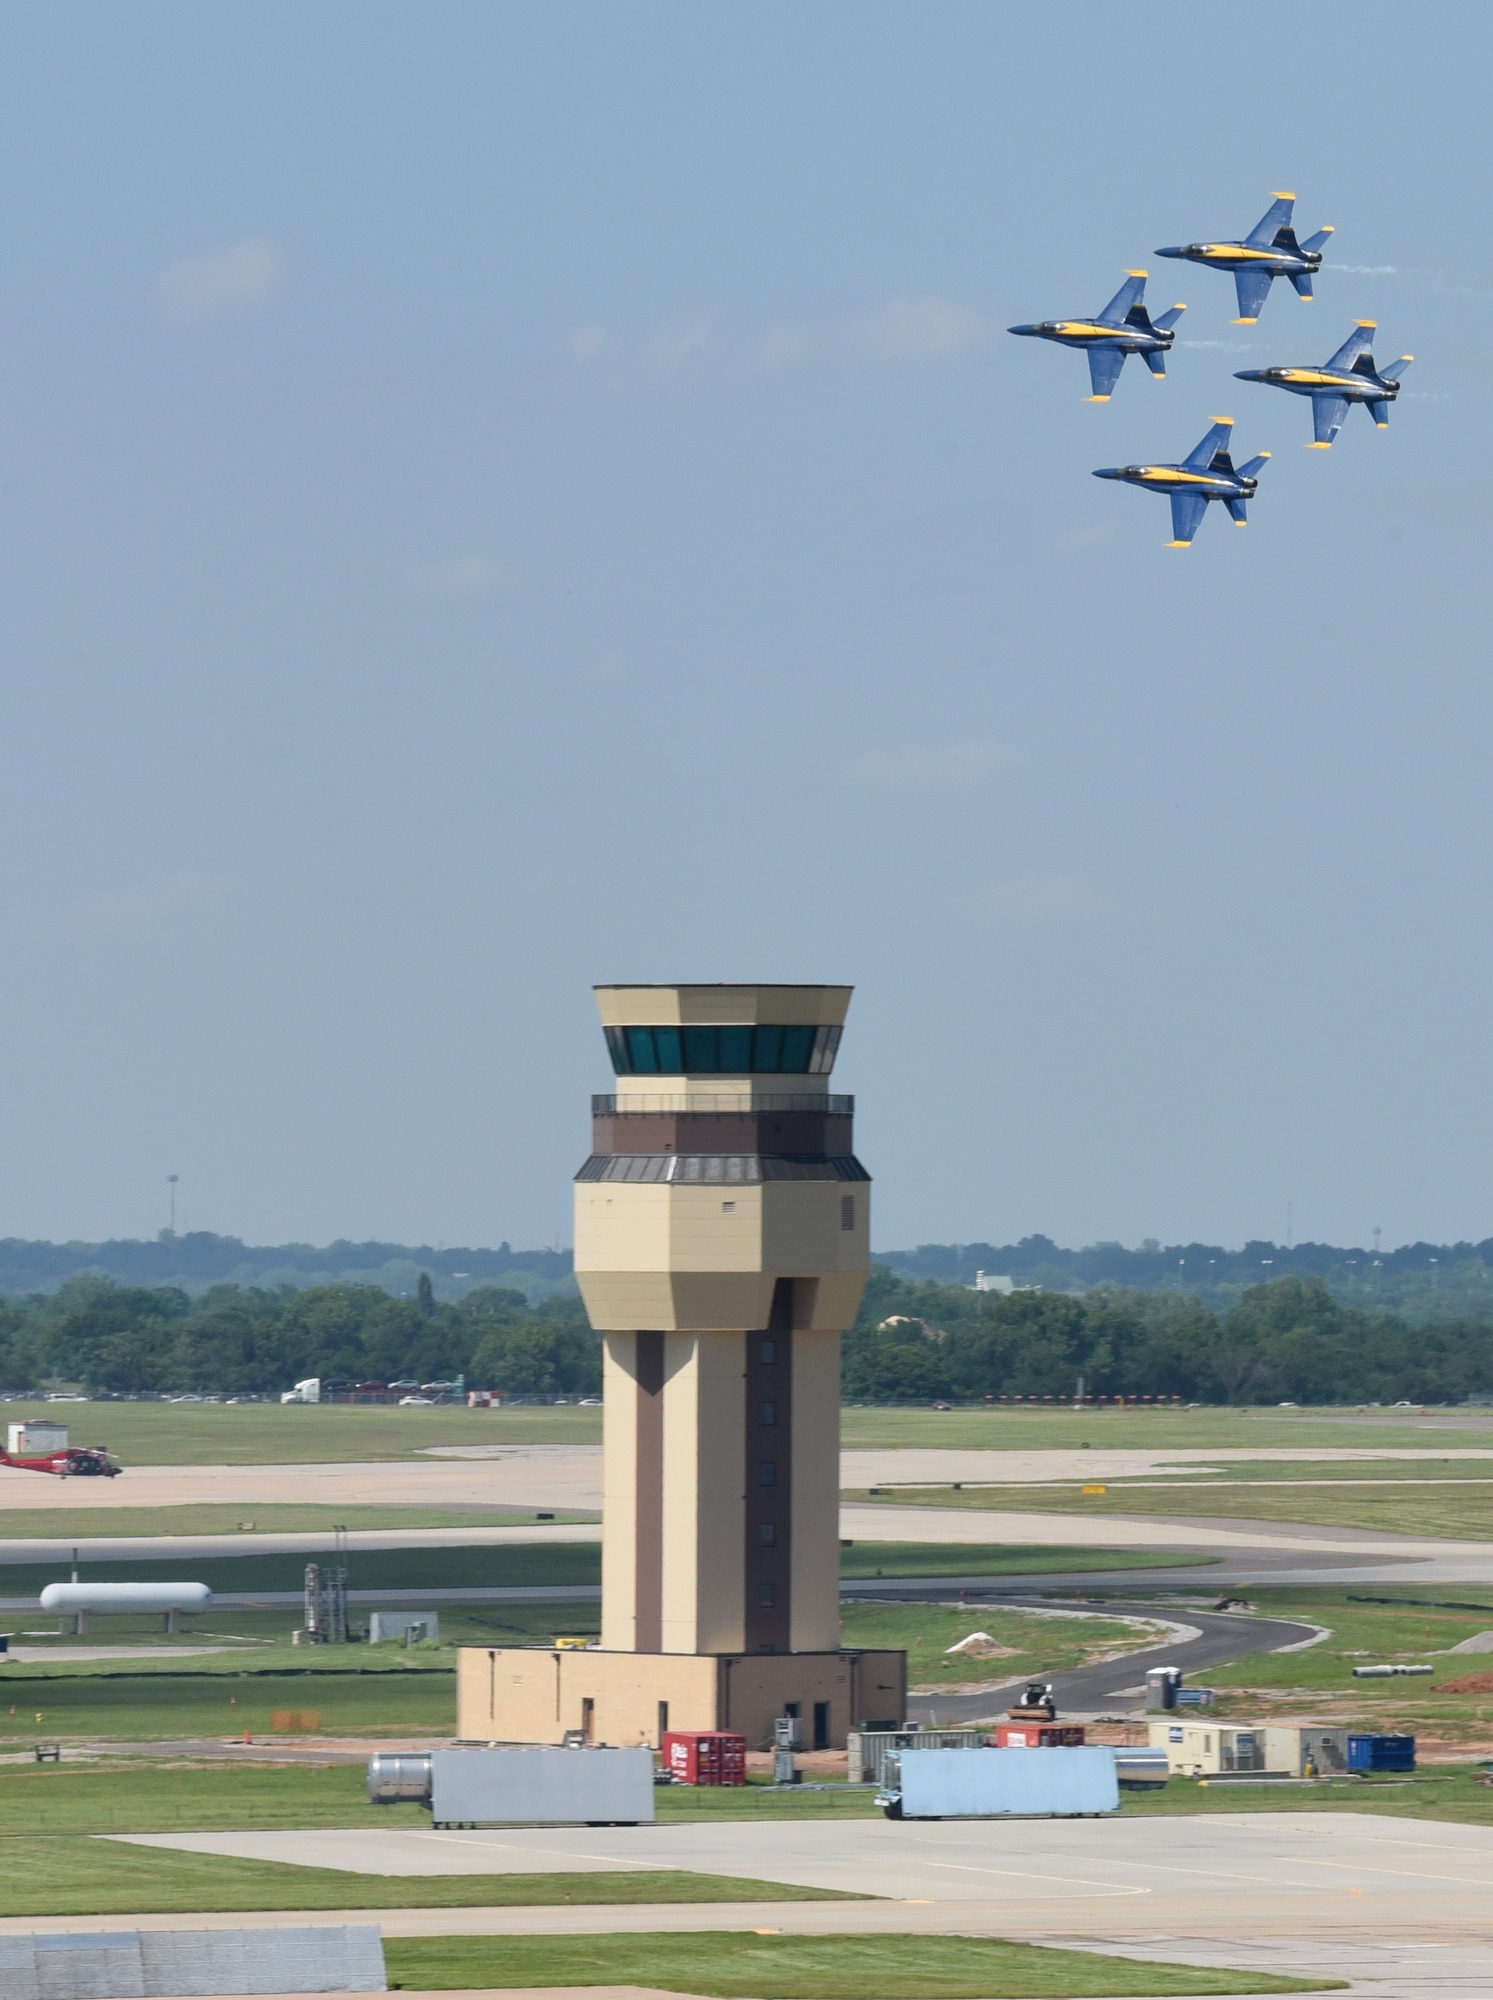 The Navy Blue Angels perform at the 2019 Star Spangled Salute Air and Space Show at Tinker Air Force Base. (U.S. Air Force photo/Kelly White)